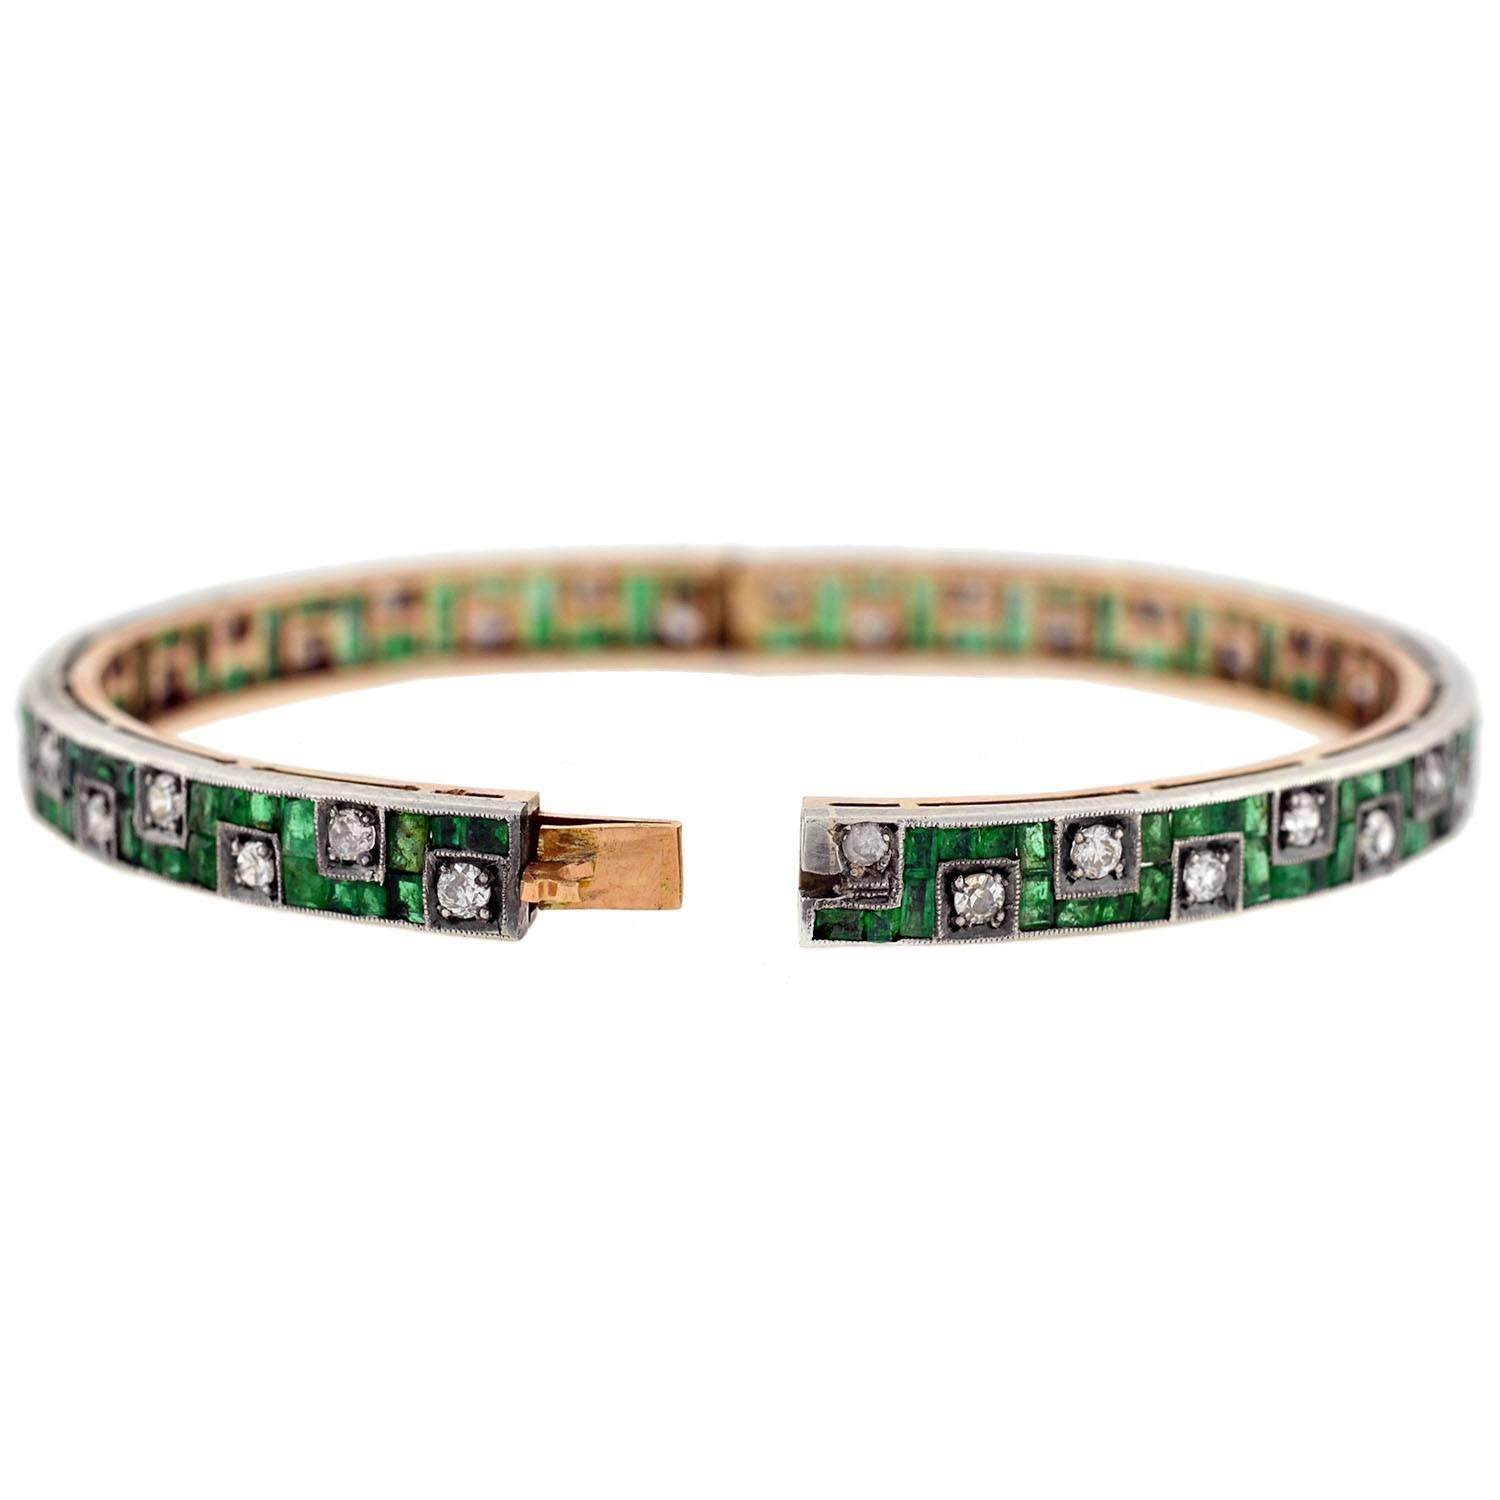 A rare and unusual bracelet from the Late Edwardian (ca1910) to Early Art Deco (ca1920) era! This magnificent bangle has a mixed metals fabrication made of platinum-topped 14kt gold, and displays a spectacular emerald and diamond design. The